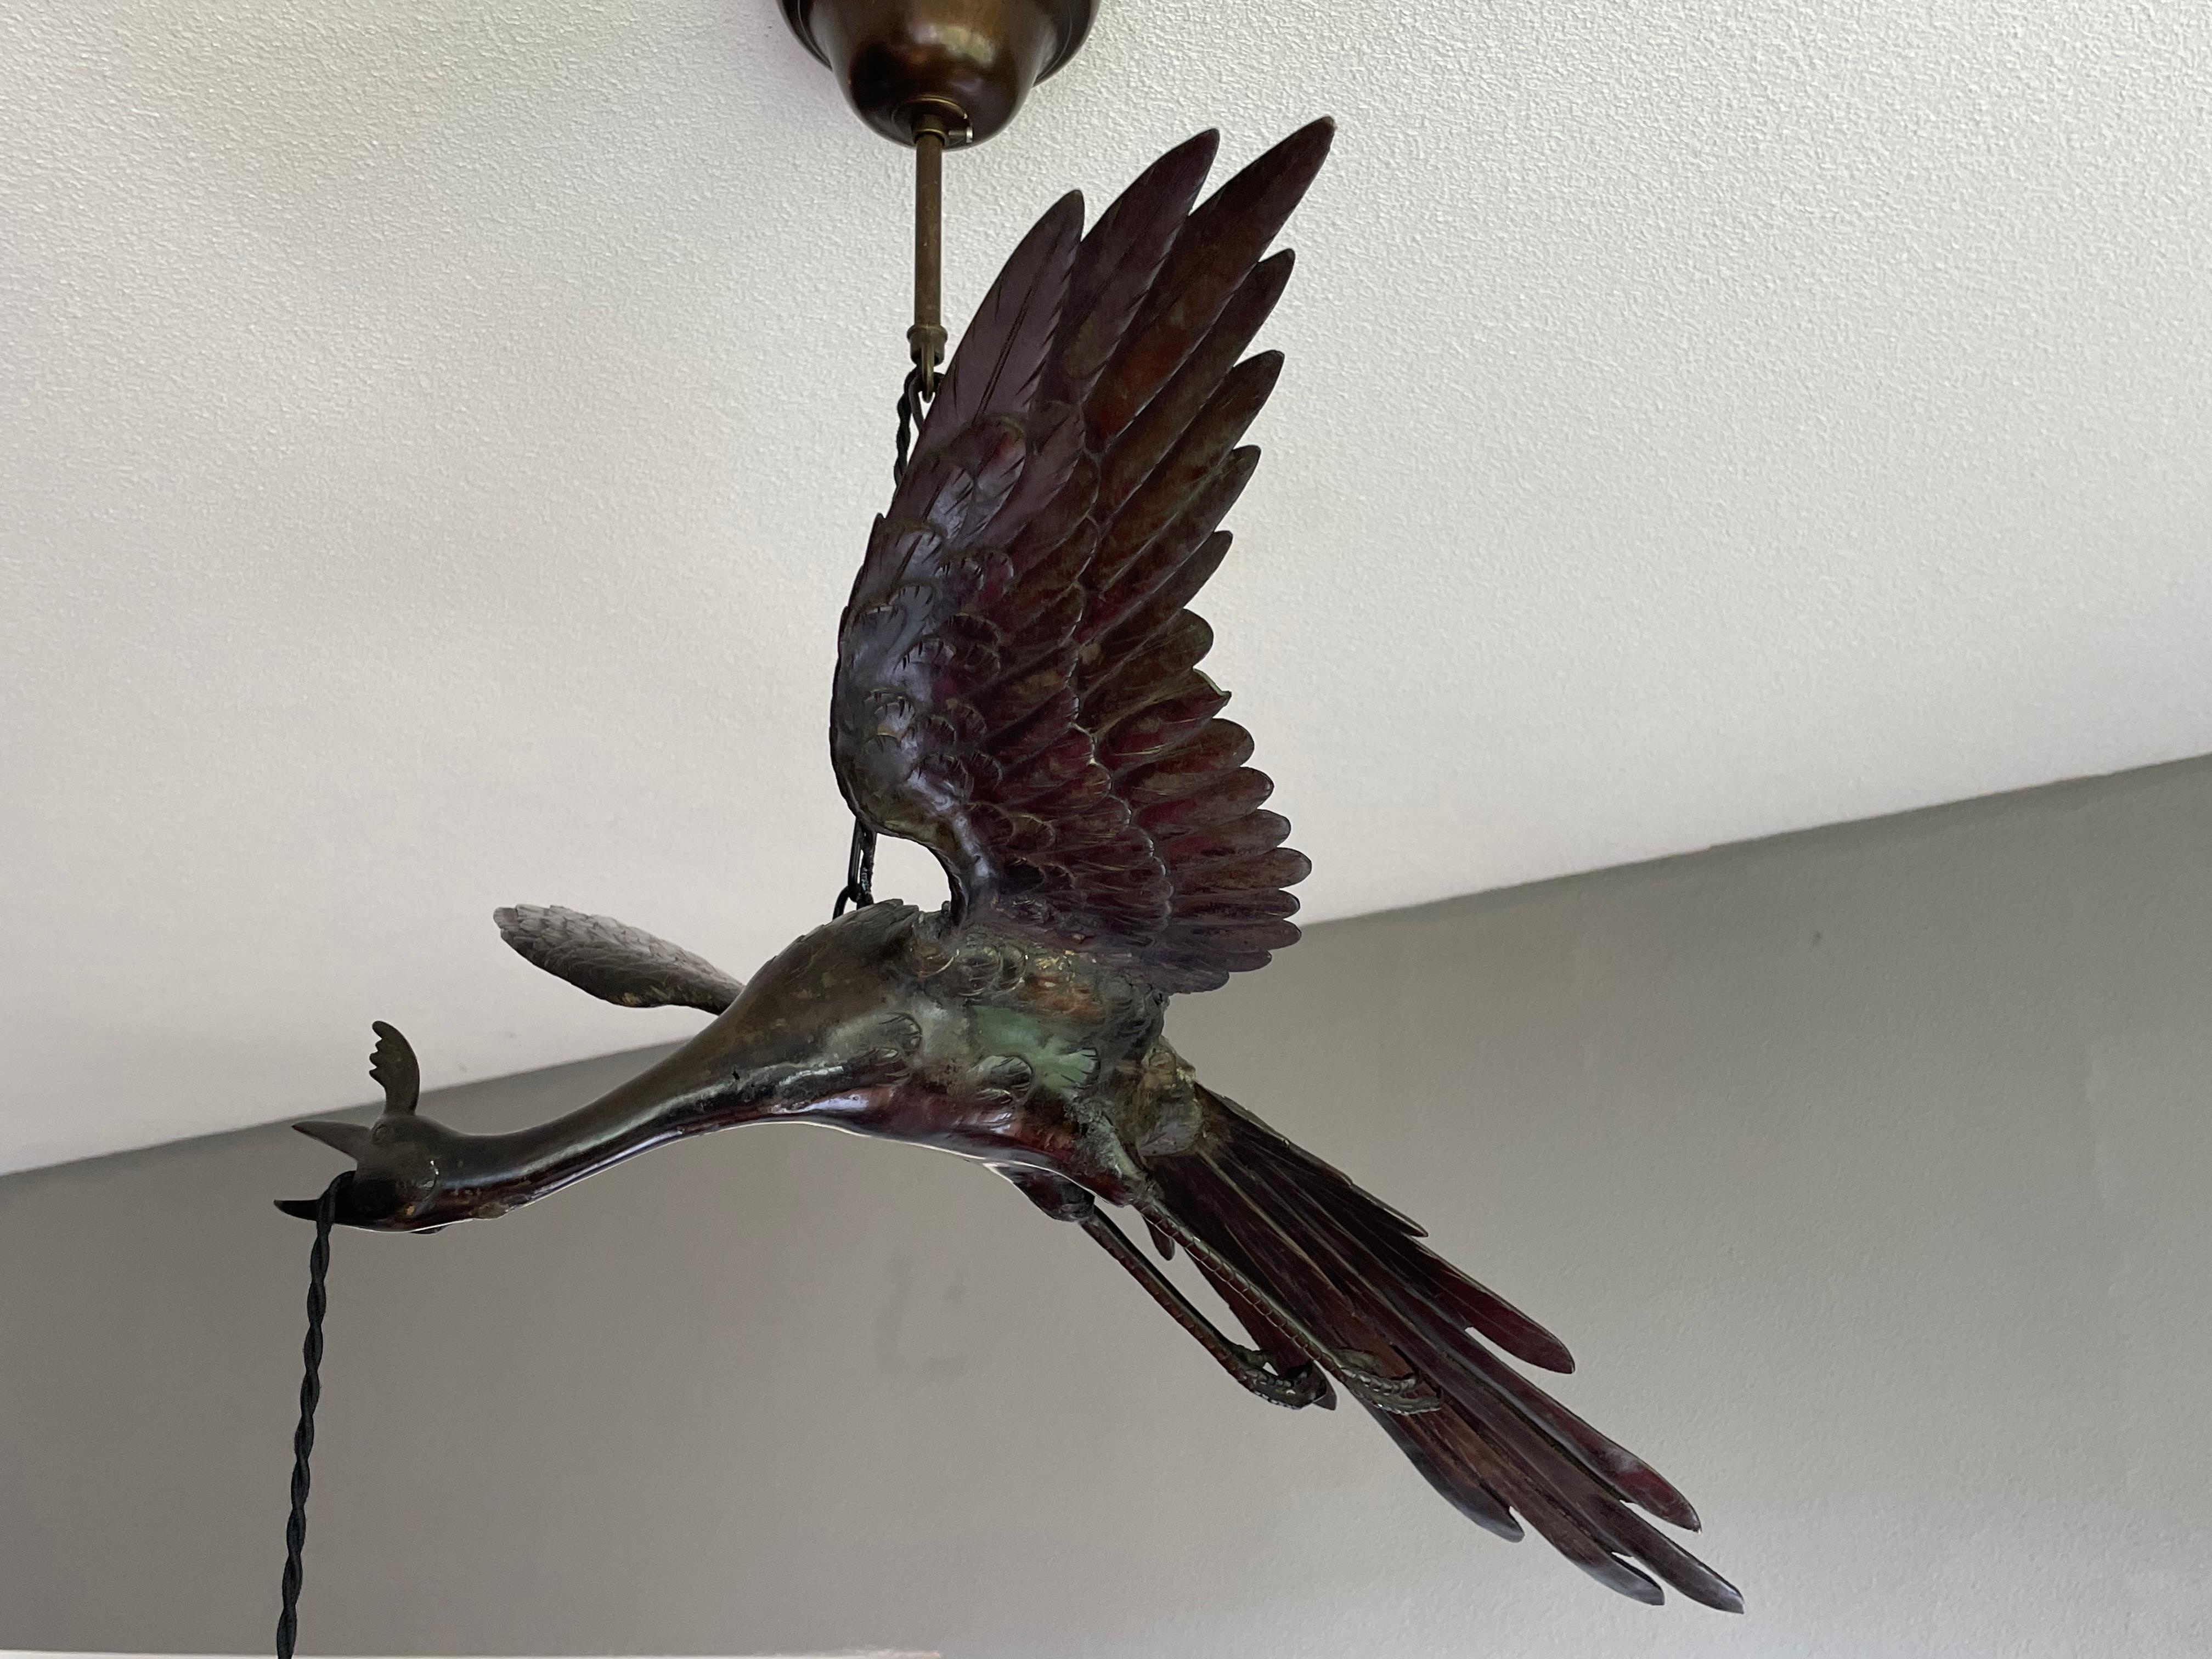 Polished Rare and Graceful Arts and Crafts Bronze Flying Crane Bird & Glass Shade Pendant For Sale